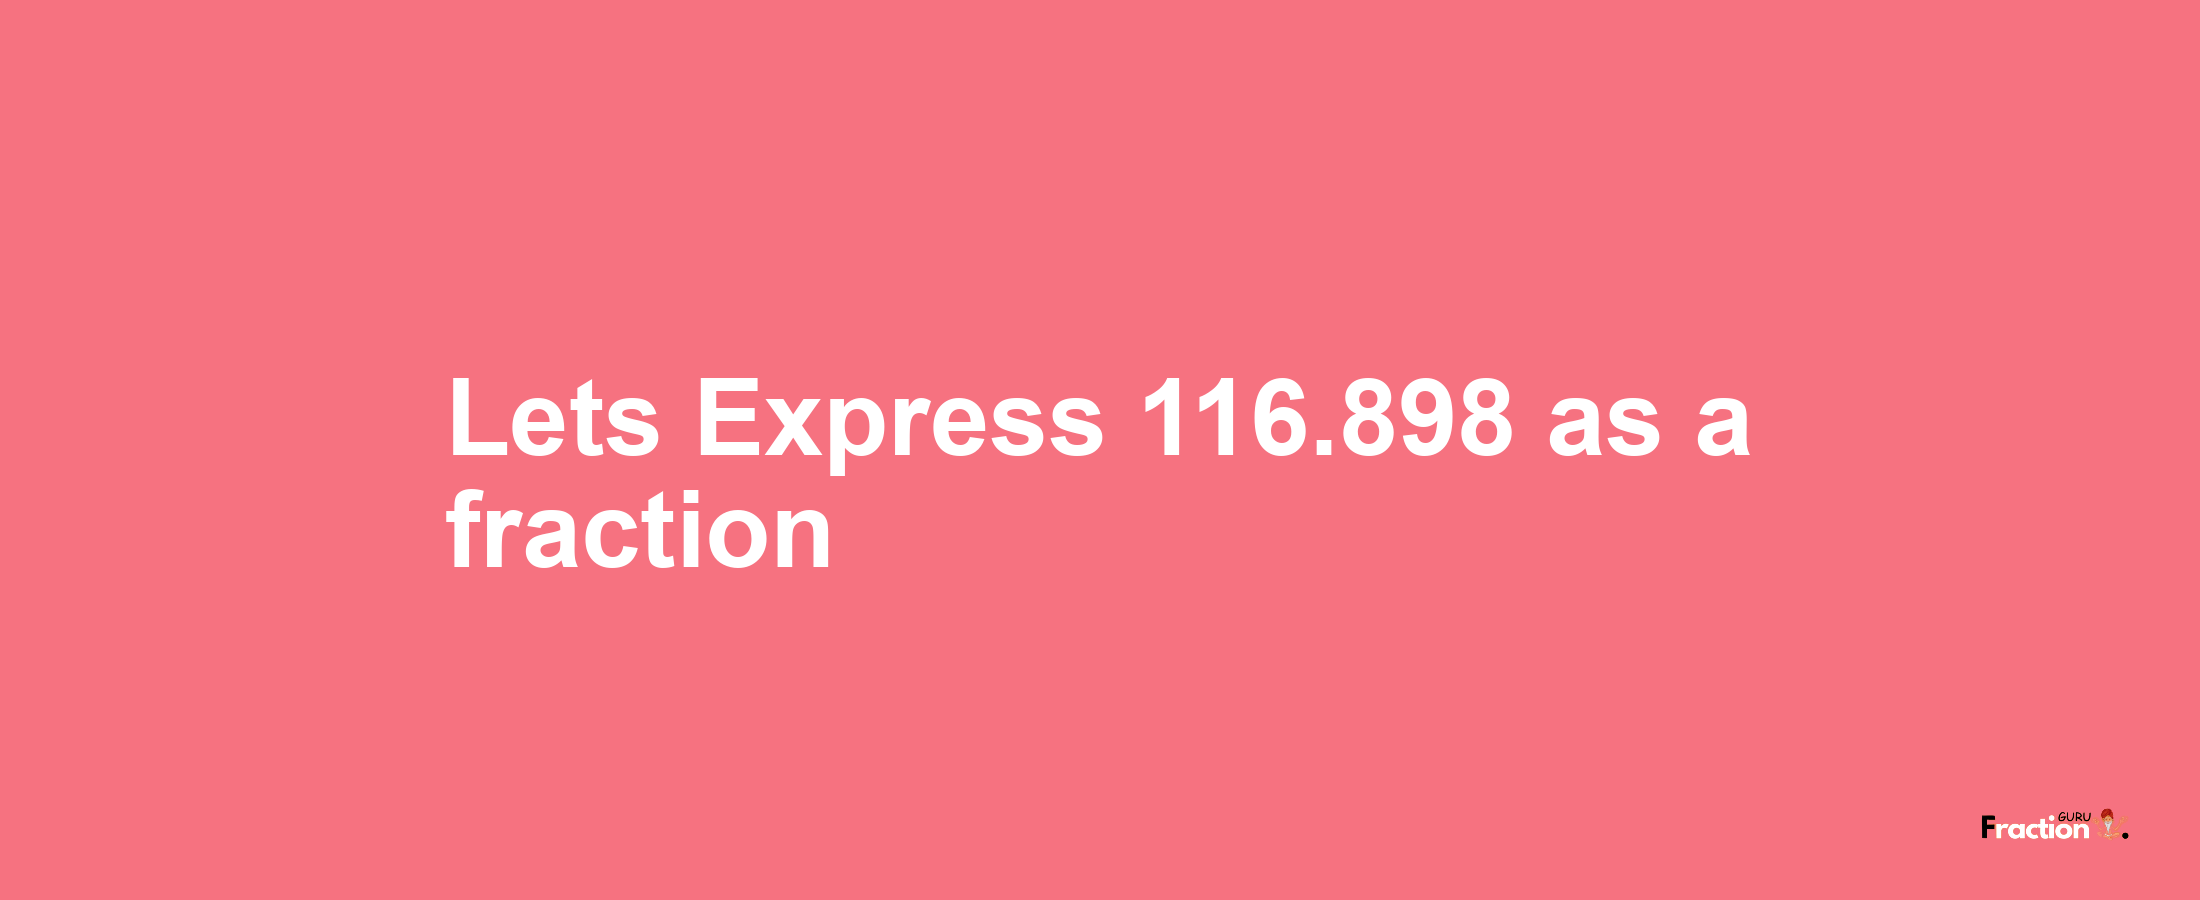 Lets Express 116.898 as afraction